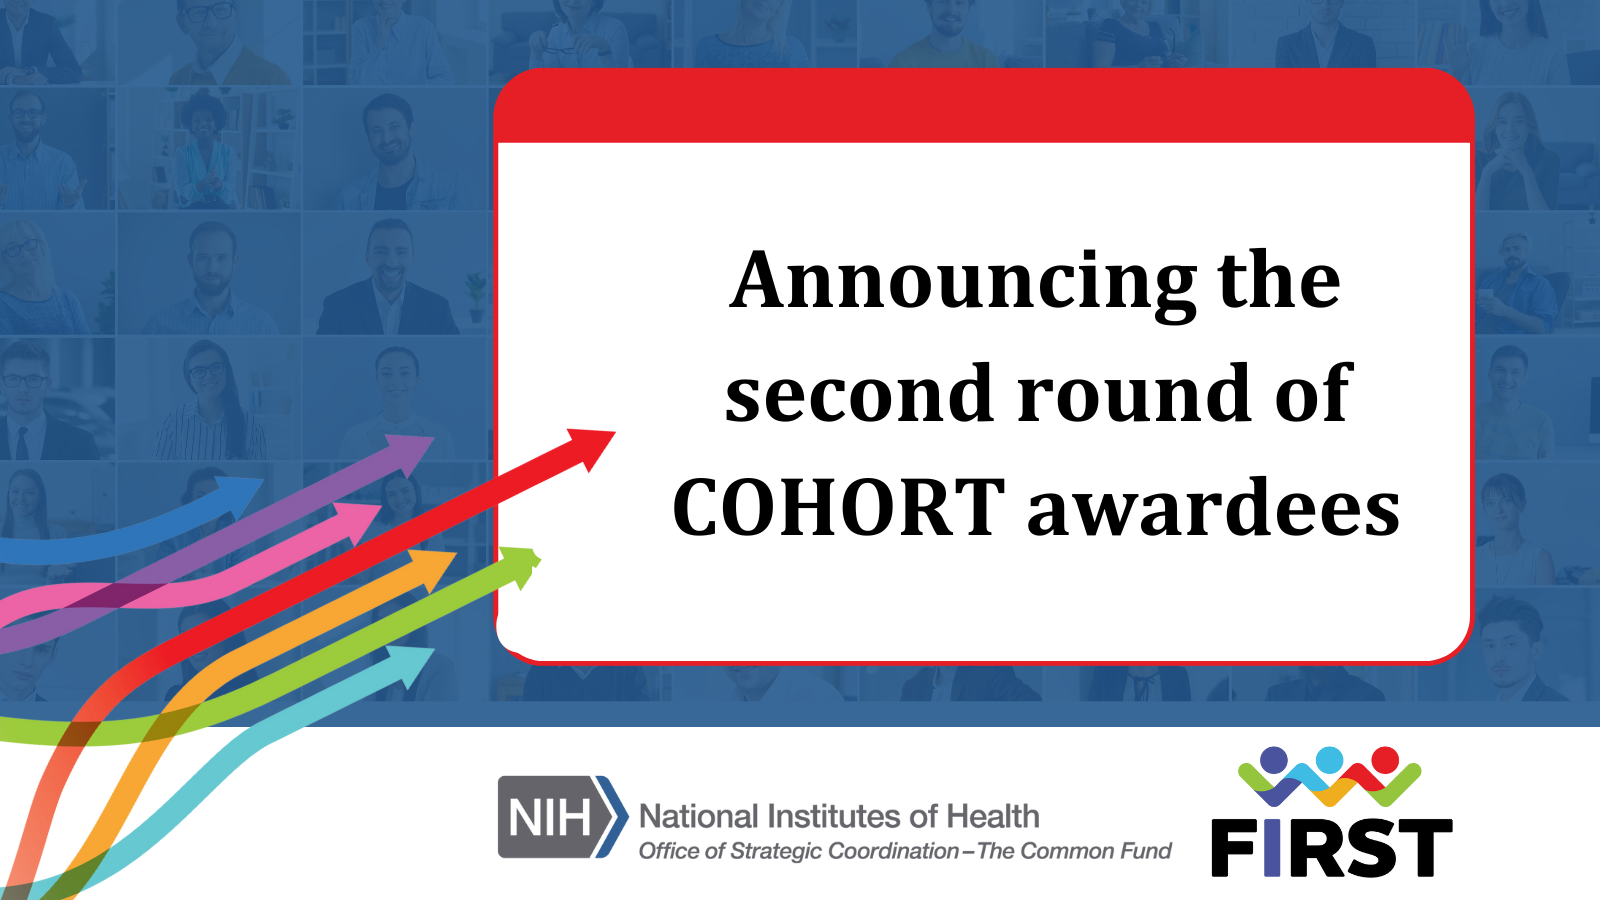 New FIRST cohort awards announced